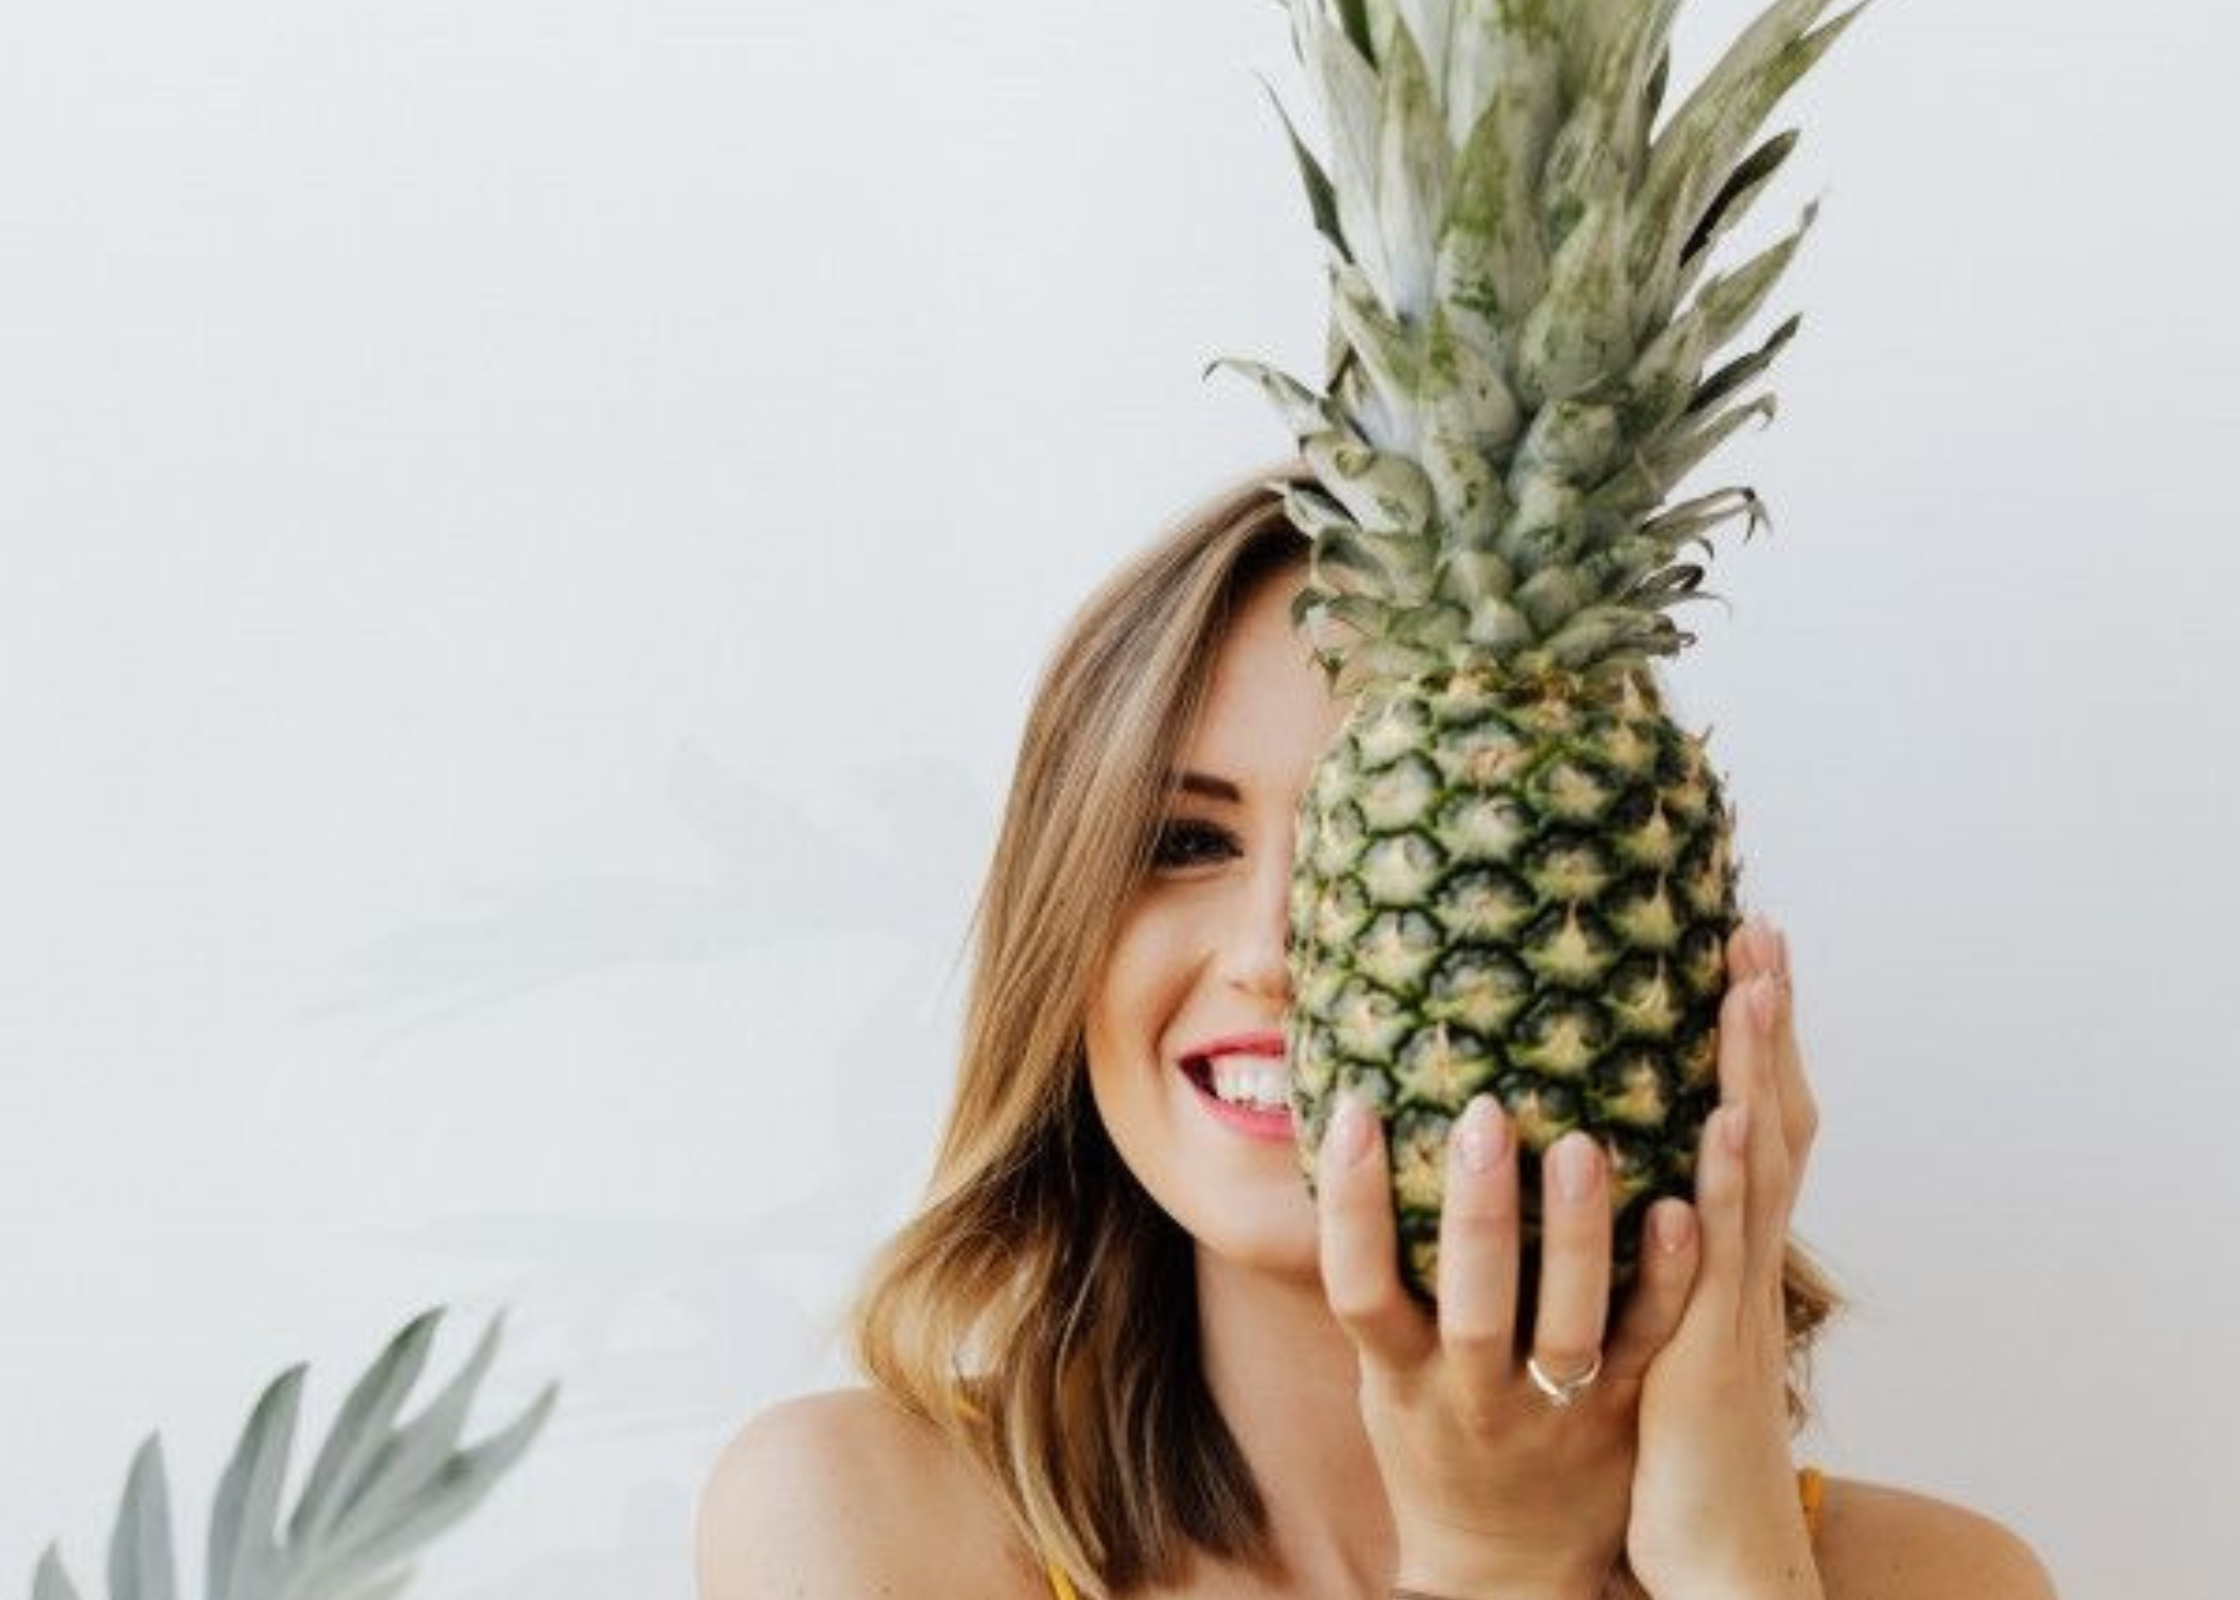 woman holding a pineapple hiding one eye. how to look good every day. how to look put together. how to look your best. how to look better. how to look perfect. look great.